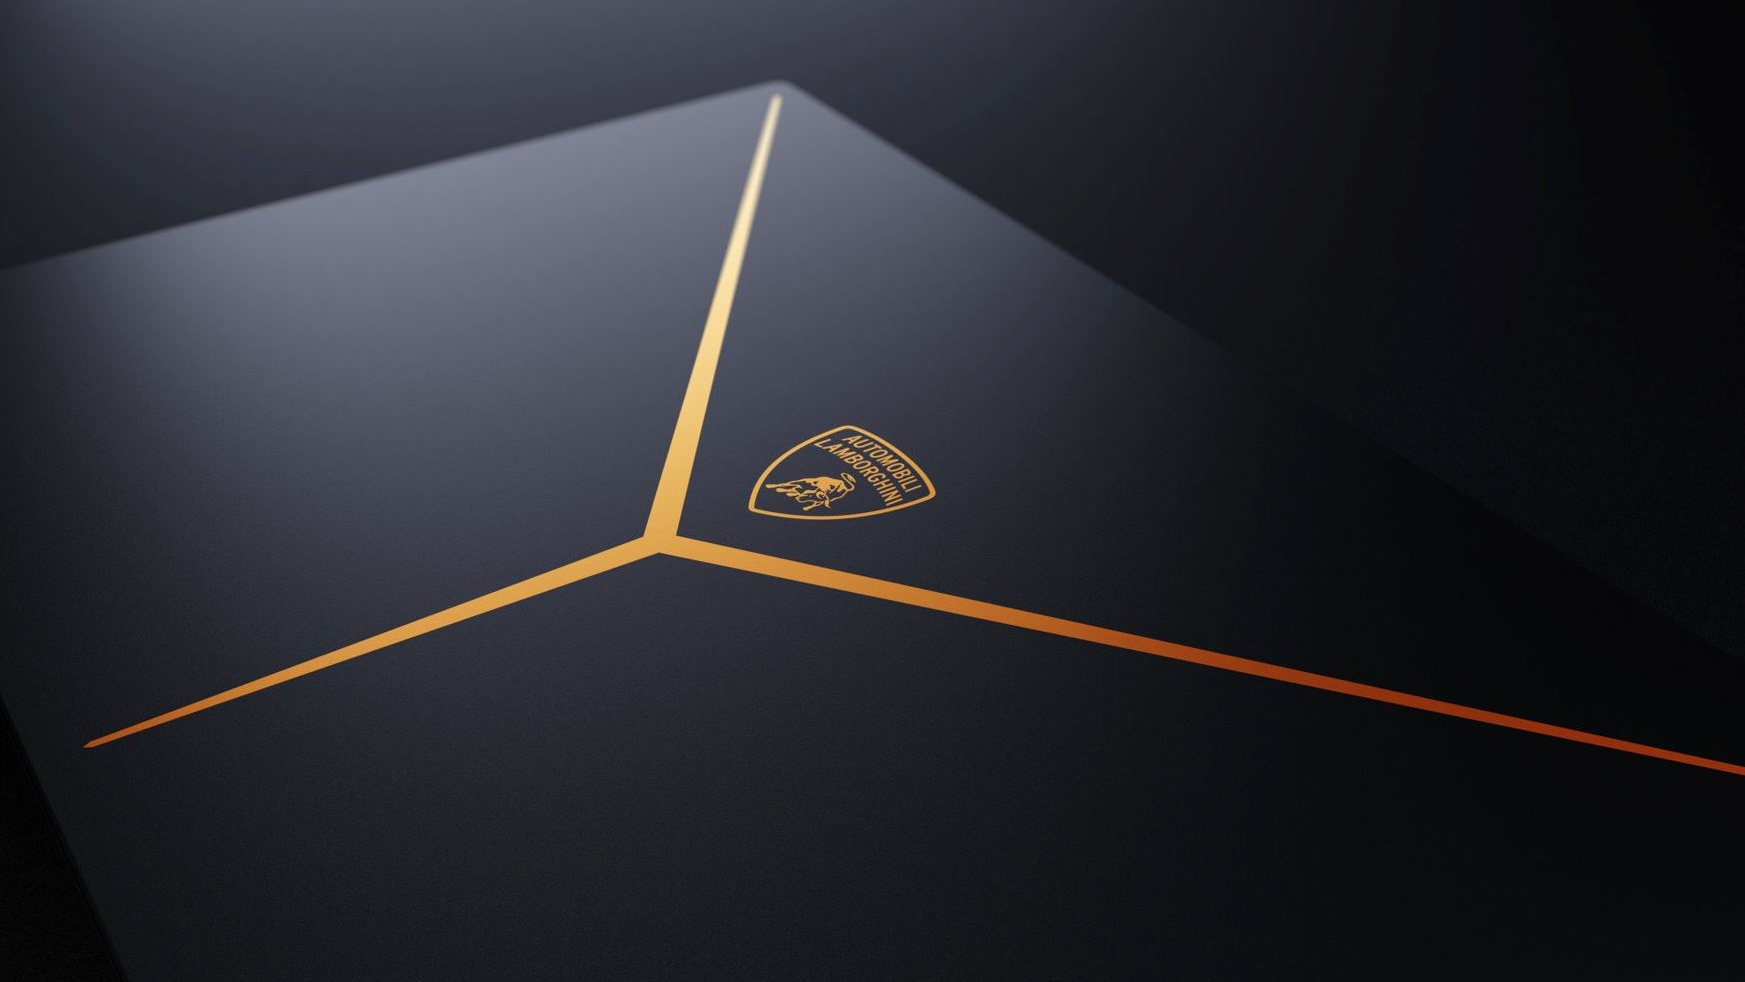  Razer is teaming up with Lamborghini to make an absurdly expensive and slightly orange gaming laptop 